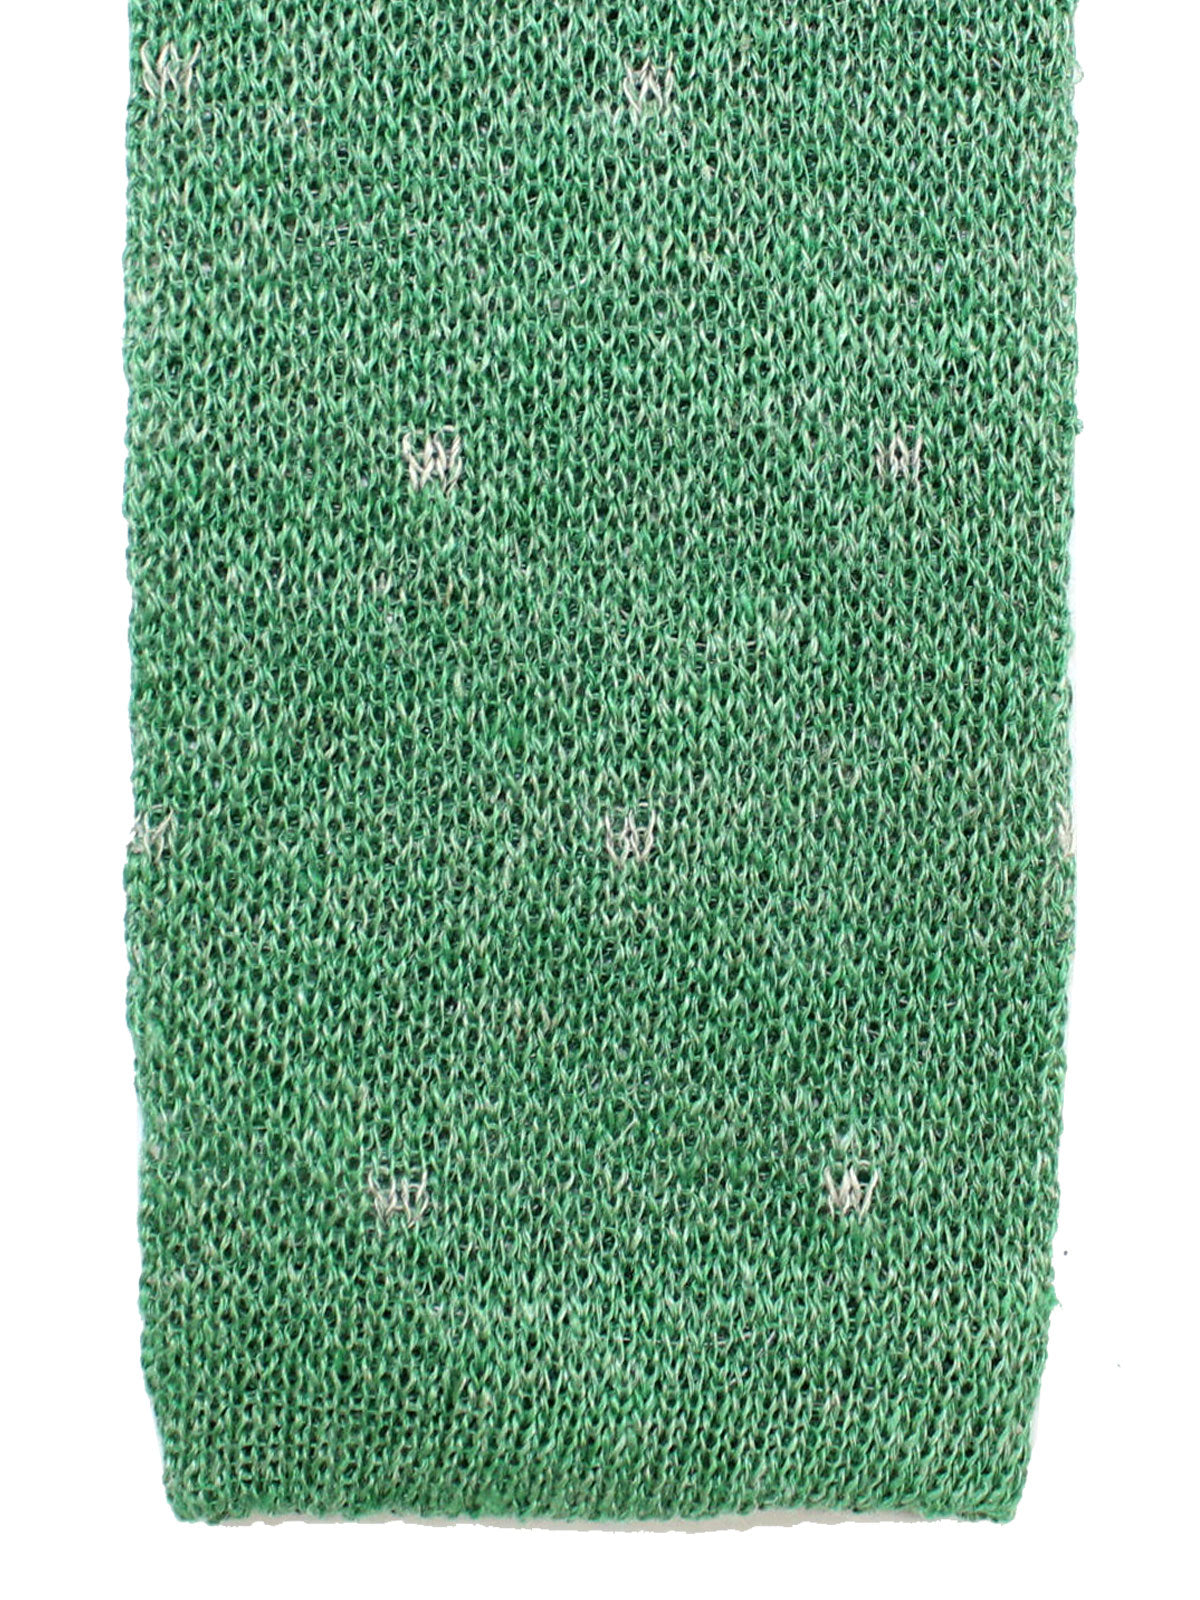 Isaia Square End Tie Green Gray Knitted Linen Necktie